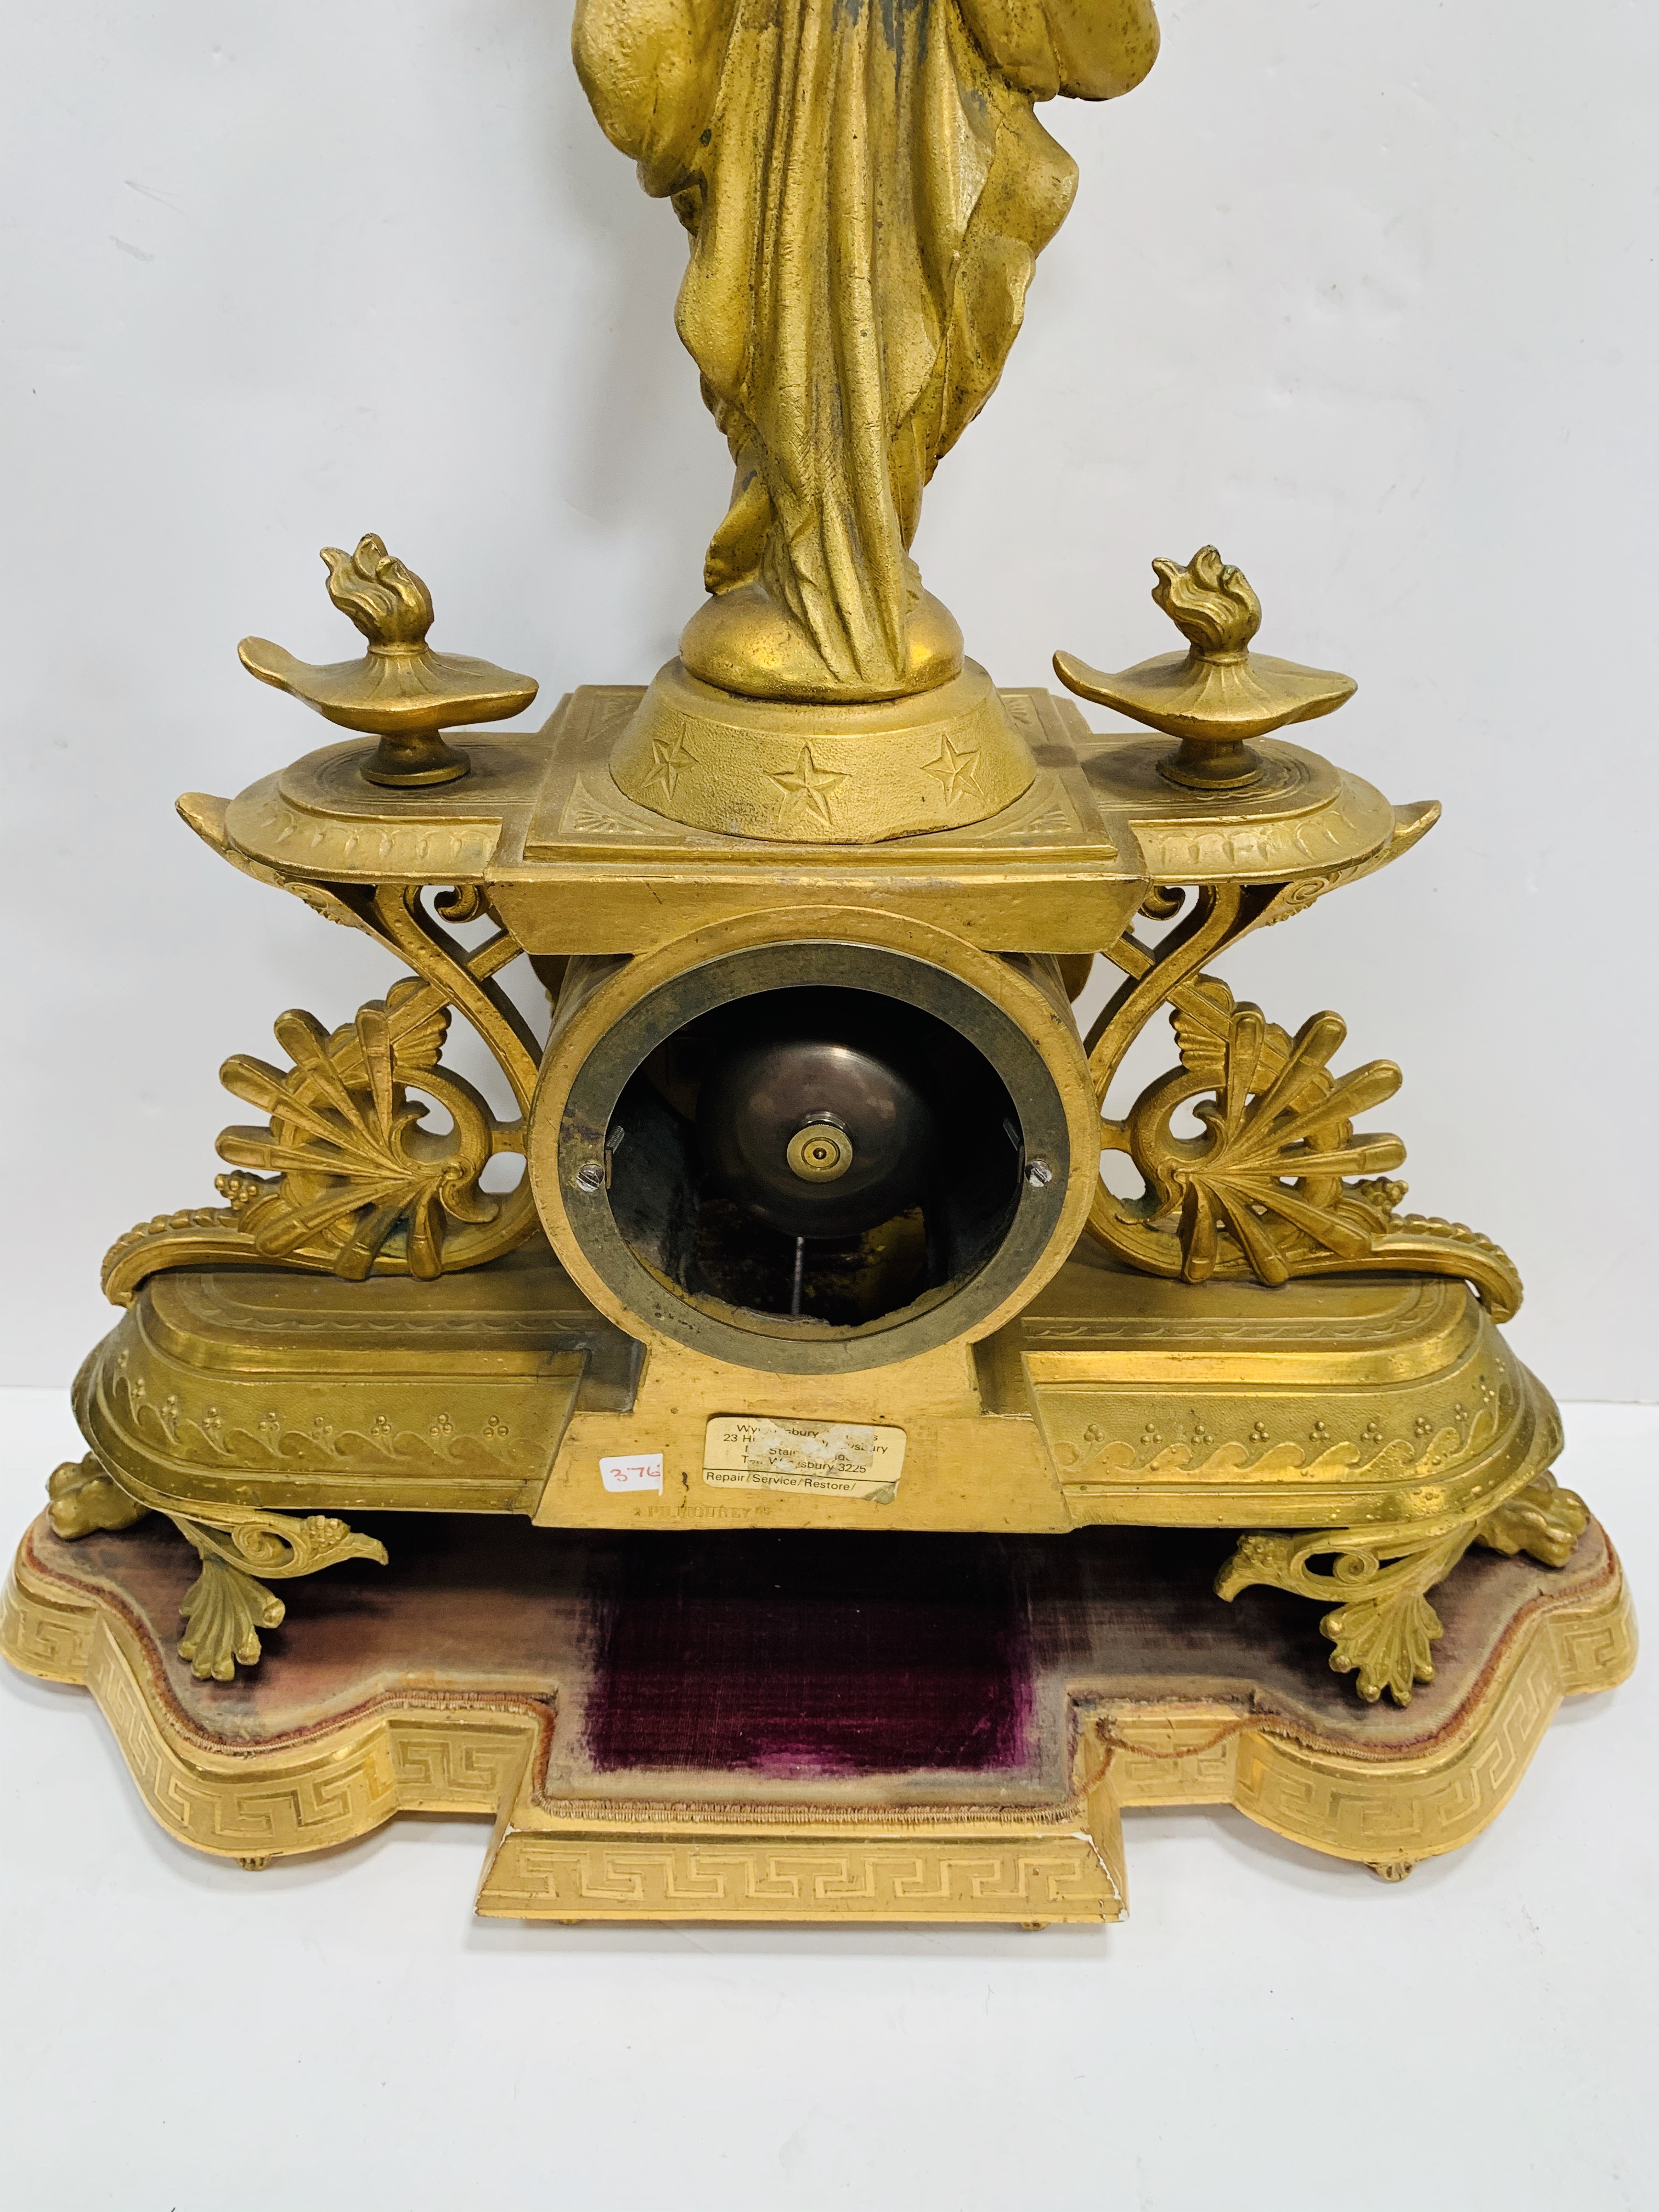 Gilded metal French mantel clock by P H Mourey. - Image 3 of 3